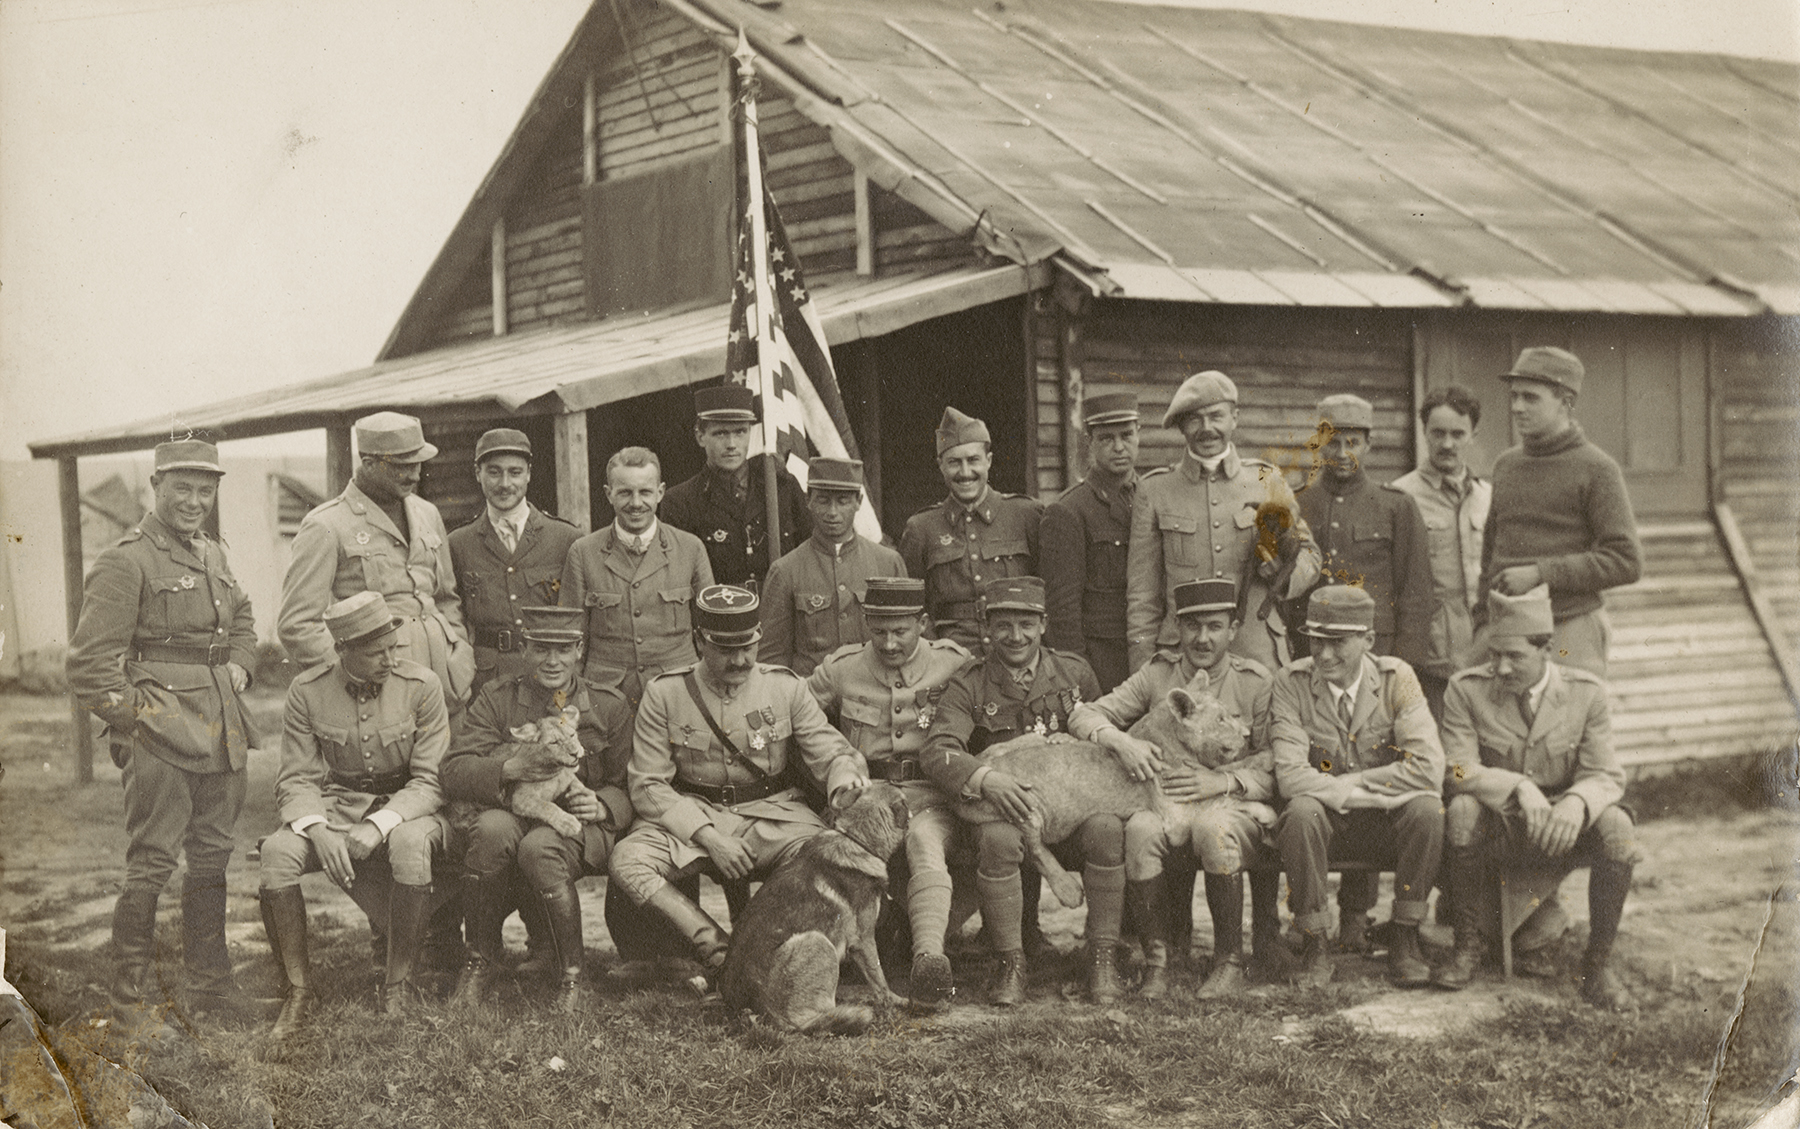 Members of the Escadrille Lafayette, along with their mascots, lions named Whiskey and Soda (from MS-502 Raoul Lufbery Collection)